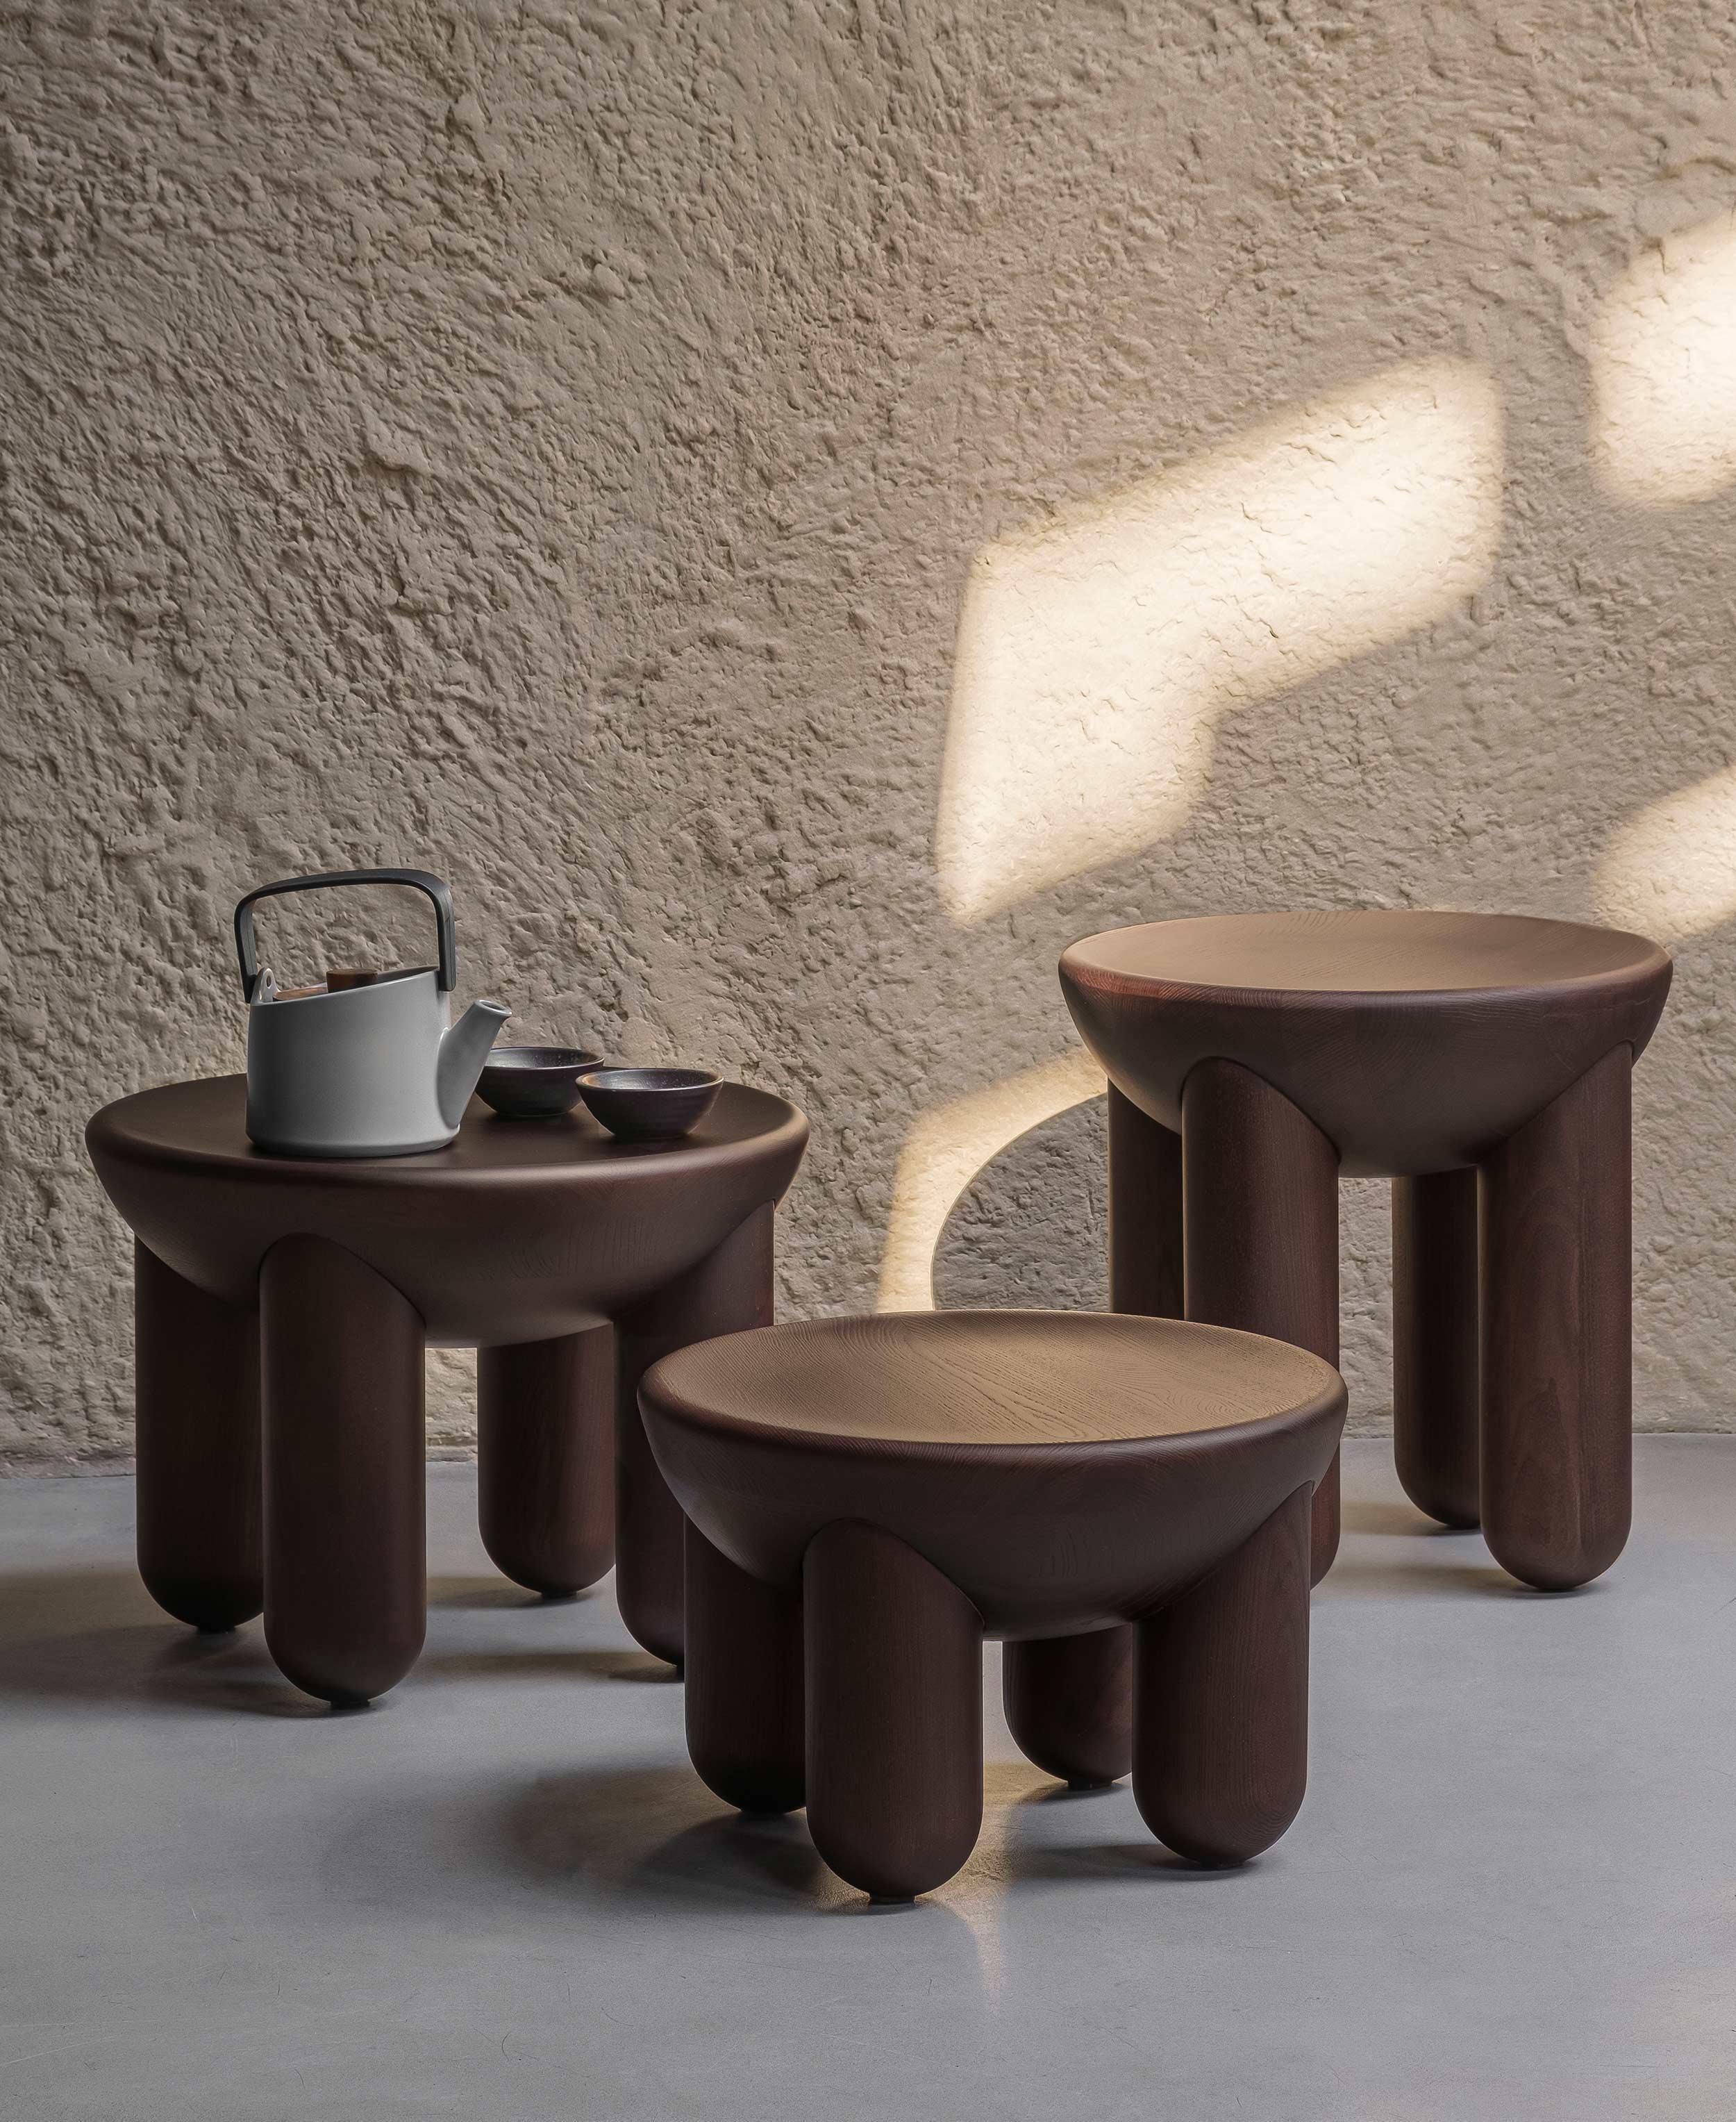 Contemporary Coffee or Side Table 'Freyja 3' by Noom
Finish: Thermo Ash
Designer: Kateryna Sokolova

Materials: Ashwood, Walnut, Thermo ash, Thermo oak
Colors for ashwood: Black stained, brown stained, natural
Dimensions: H 44 cm, Ø 40 cm.

Gently